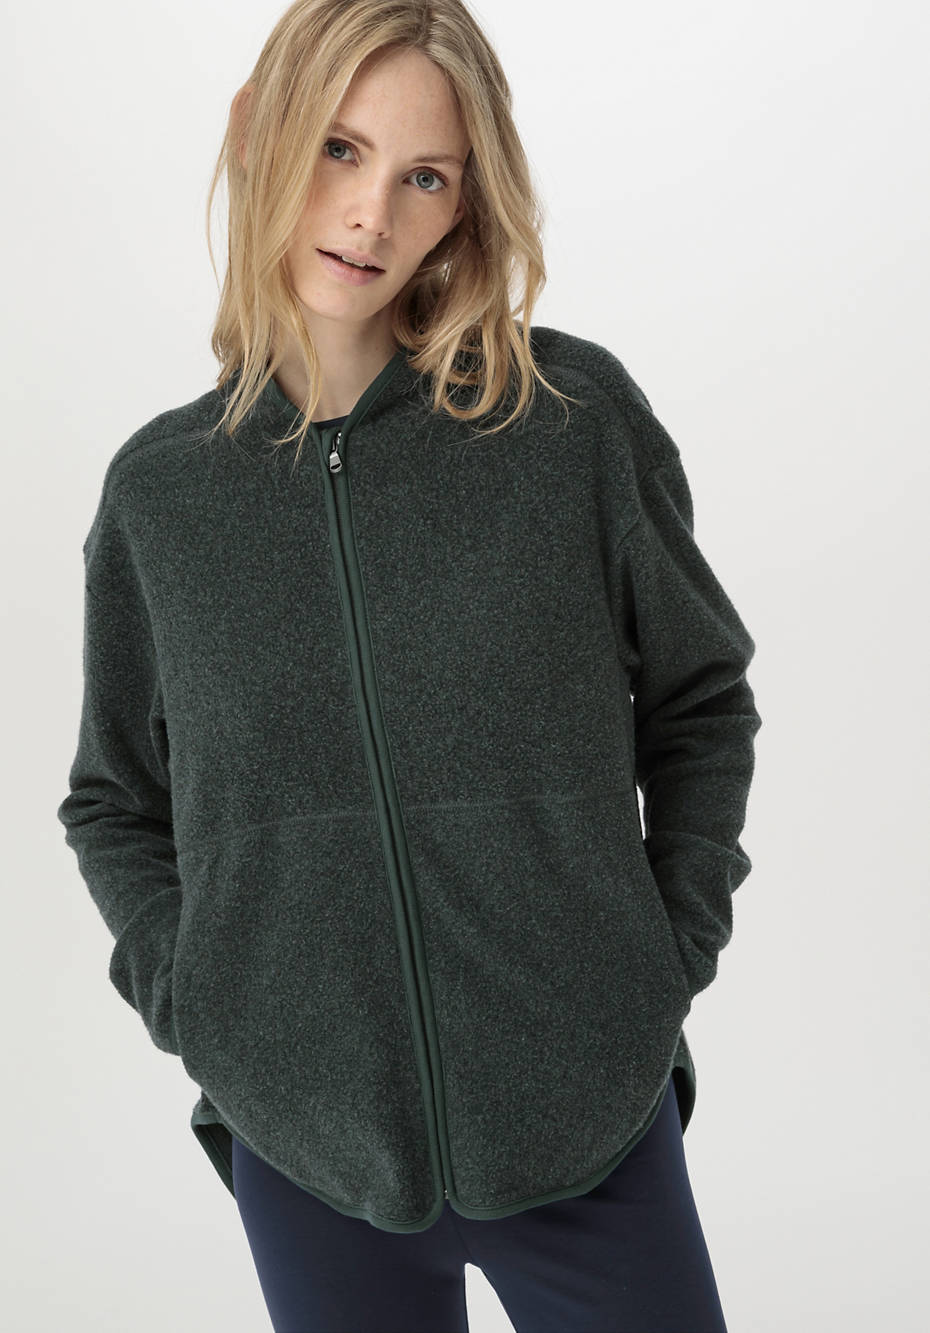 Fleece jacket ACTIVE LIGHT made from pure organic cotton